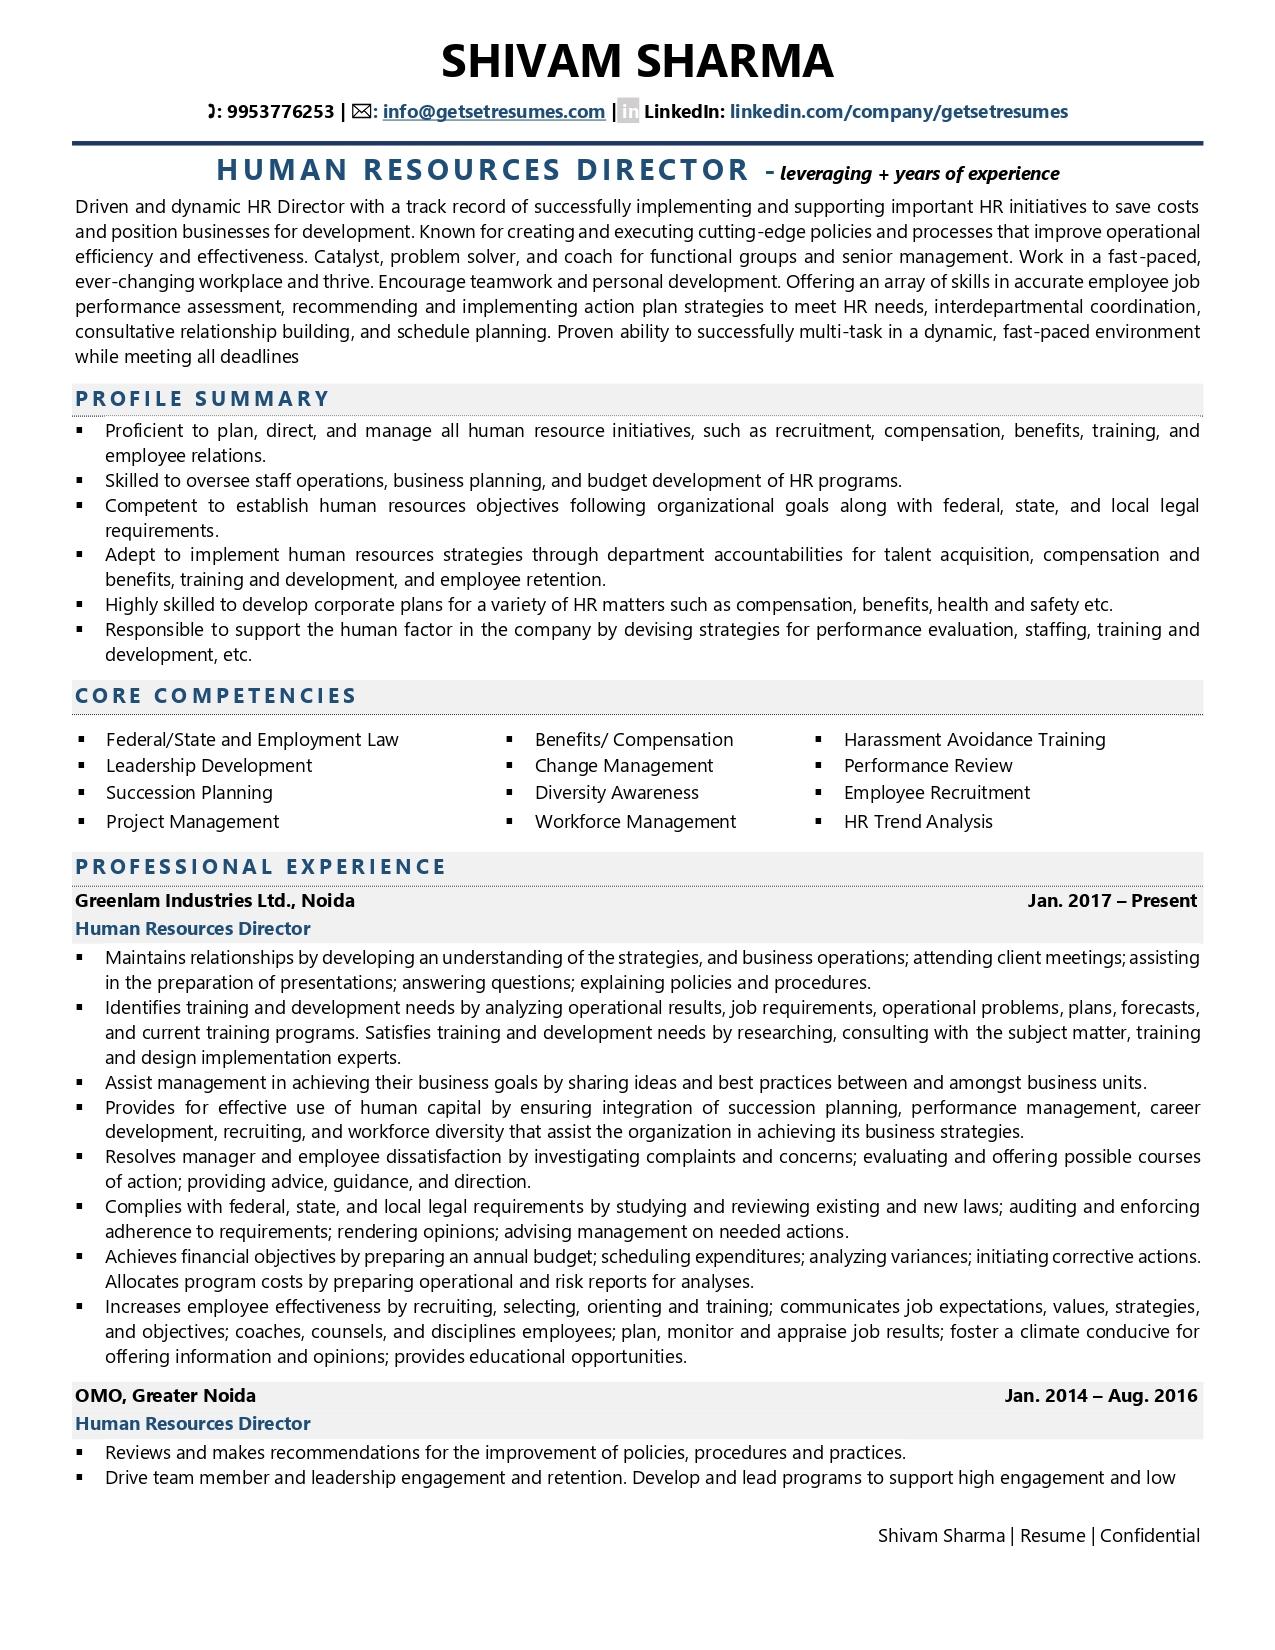 Human Resources Director - Resume Example & Template